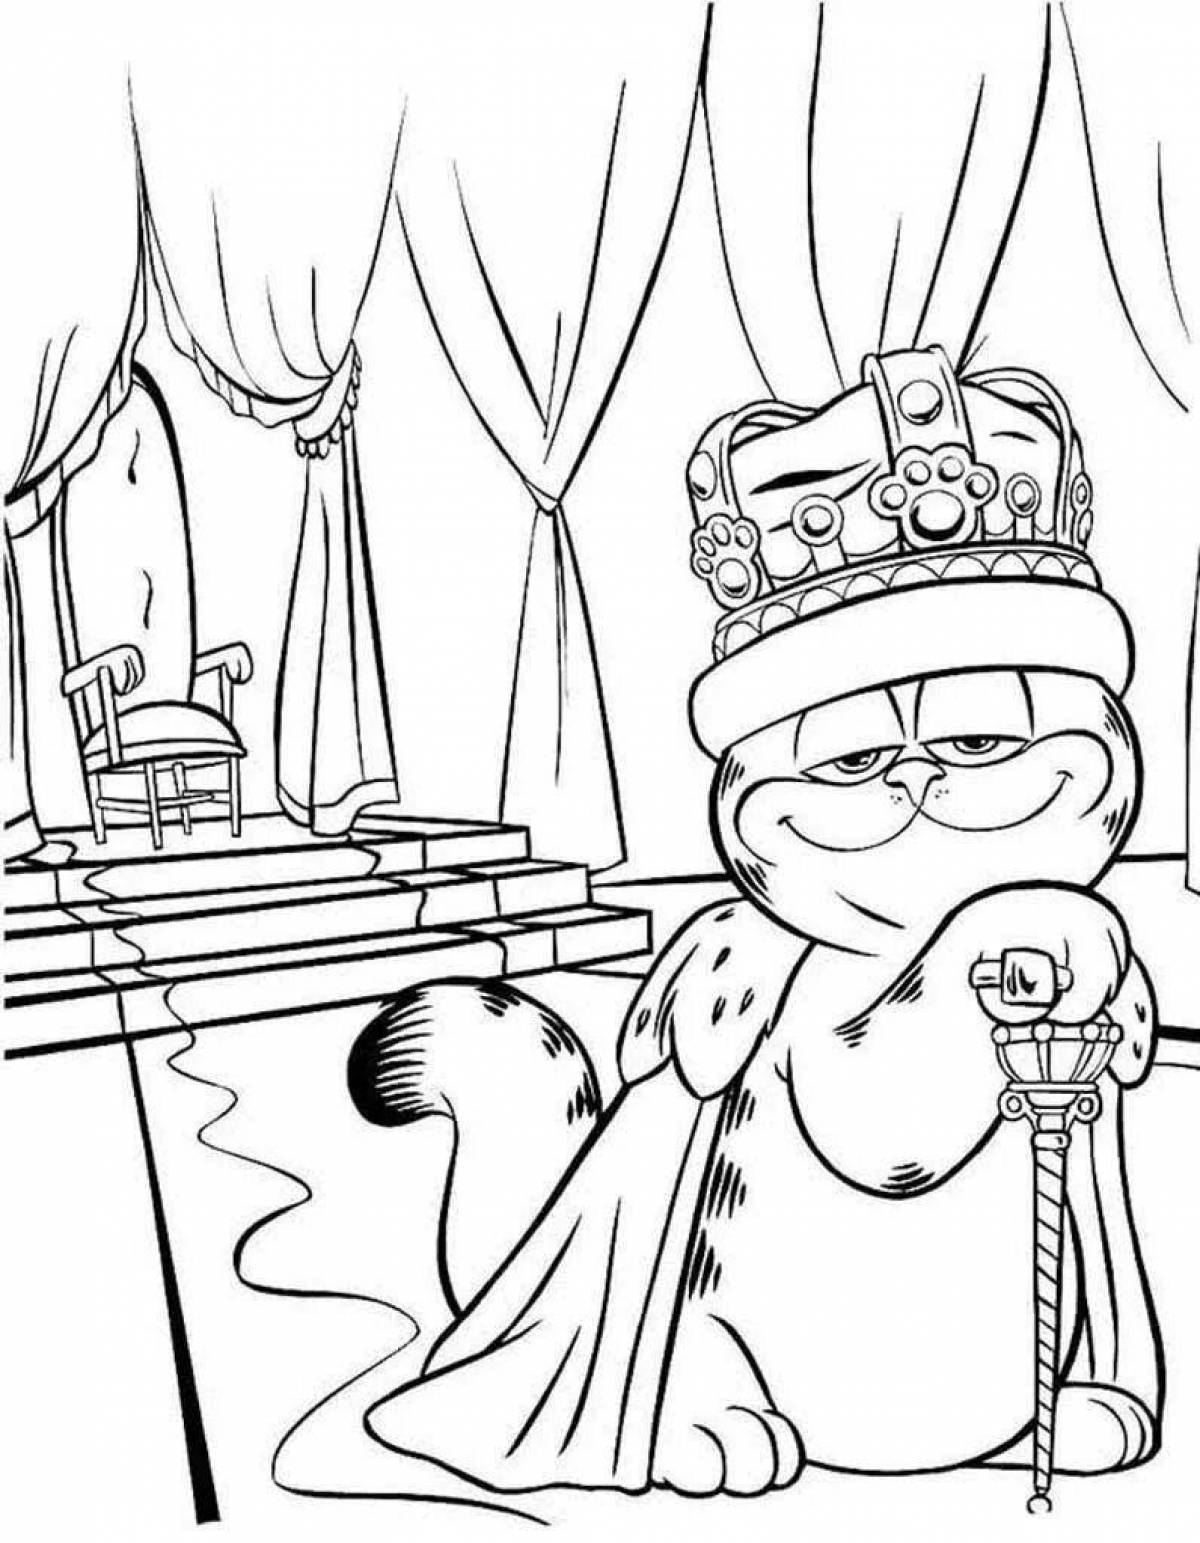 Charming garfield coloring page